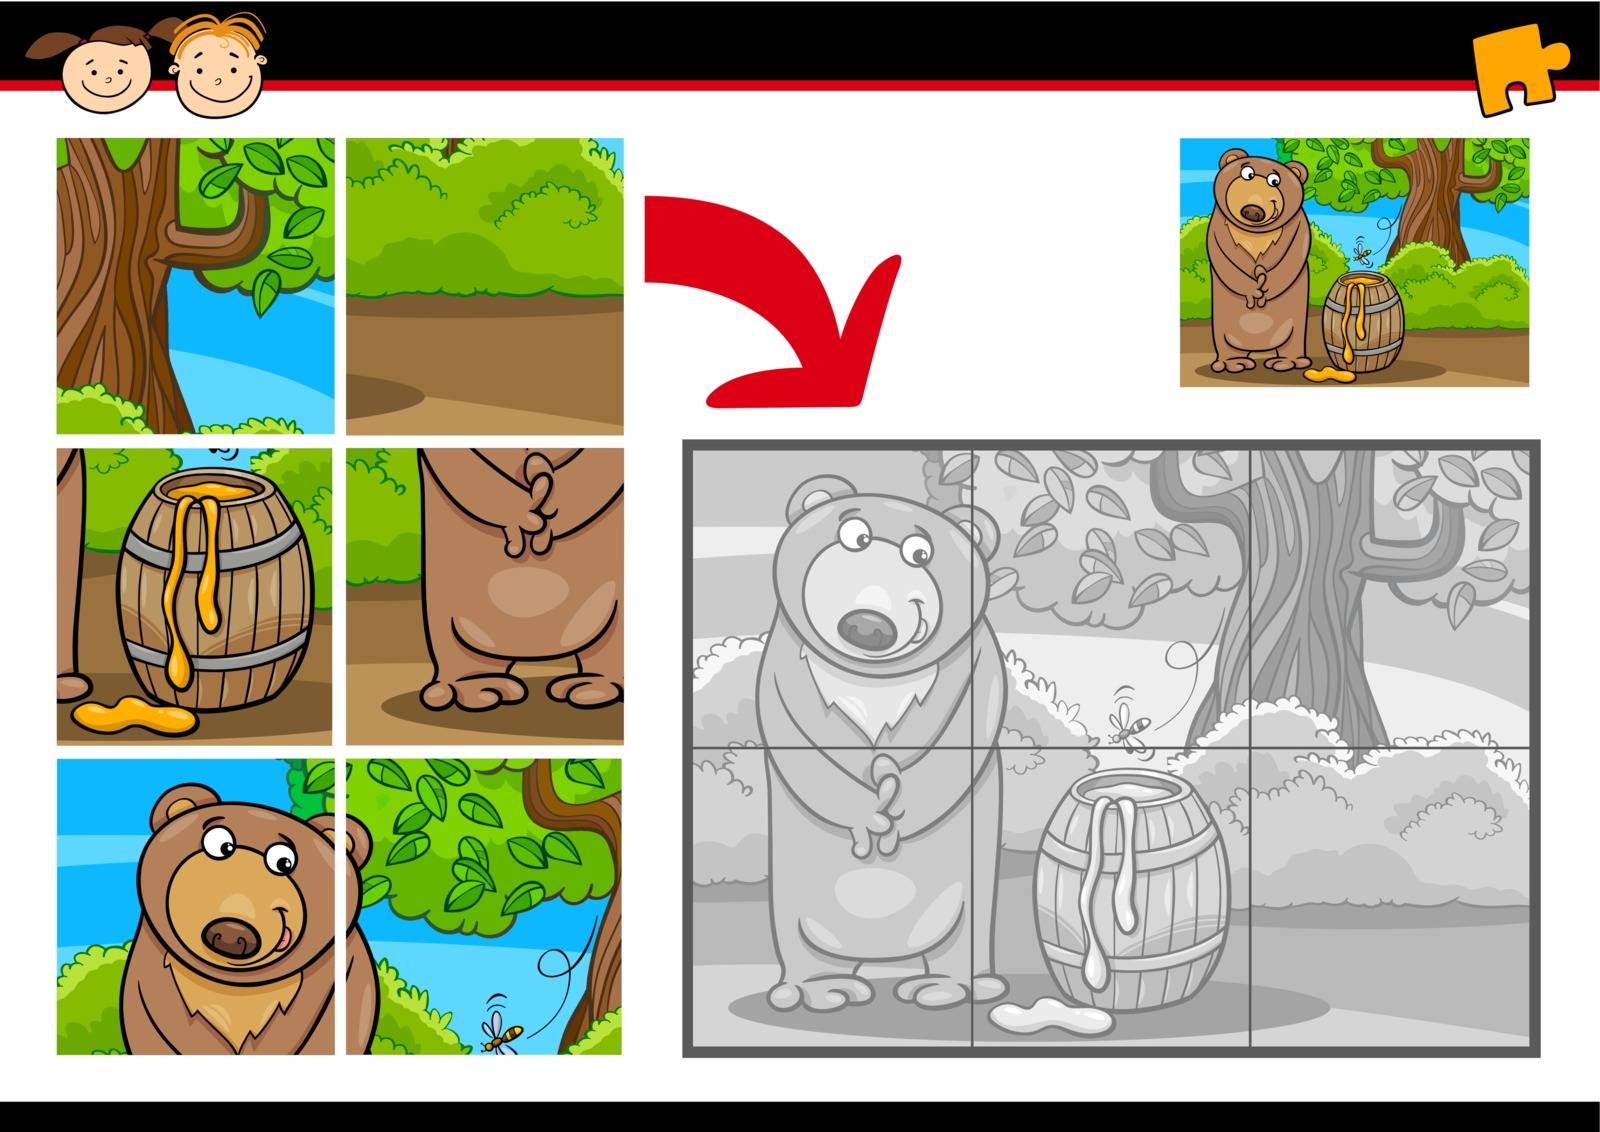 Cartoon Illustration of Education Jigsaw Puzzle Game for Preschool Children with Funny Bear Animal